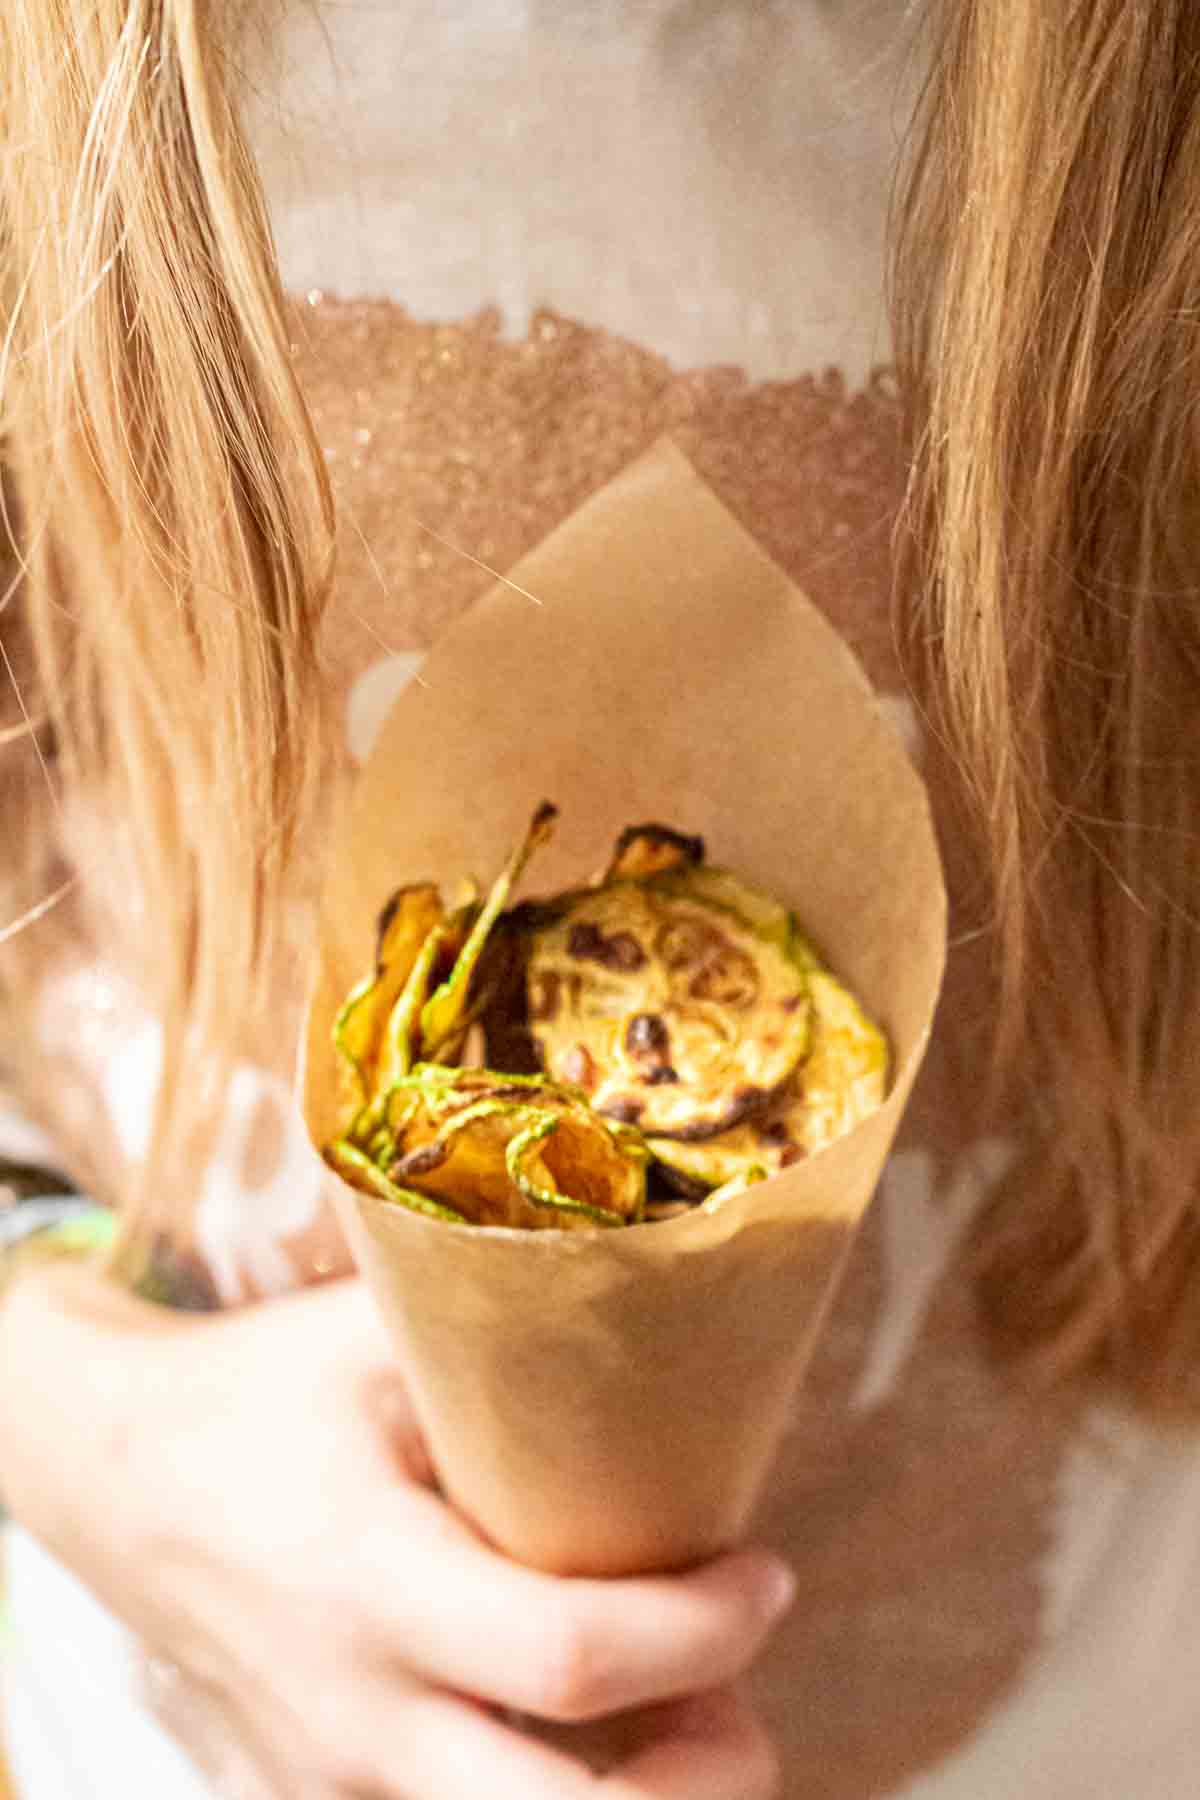 A girl holding a brown paper bag filled with chips.